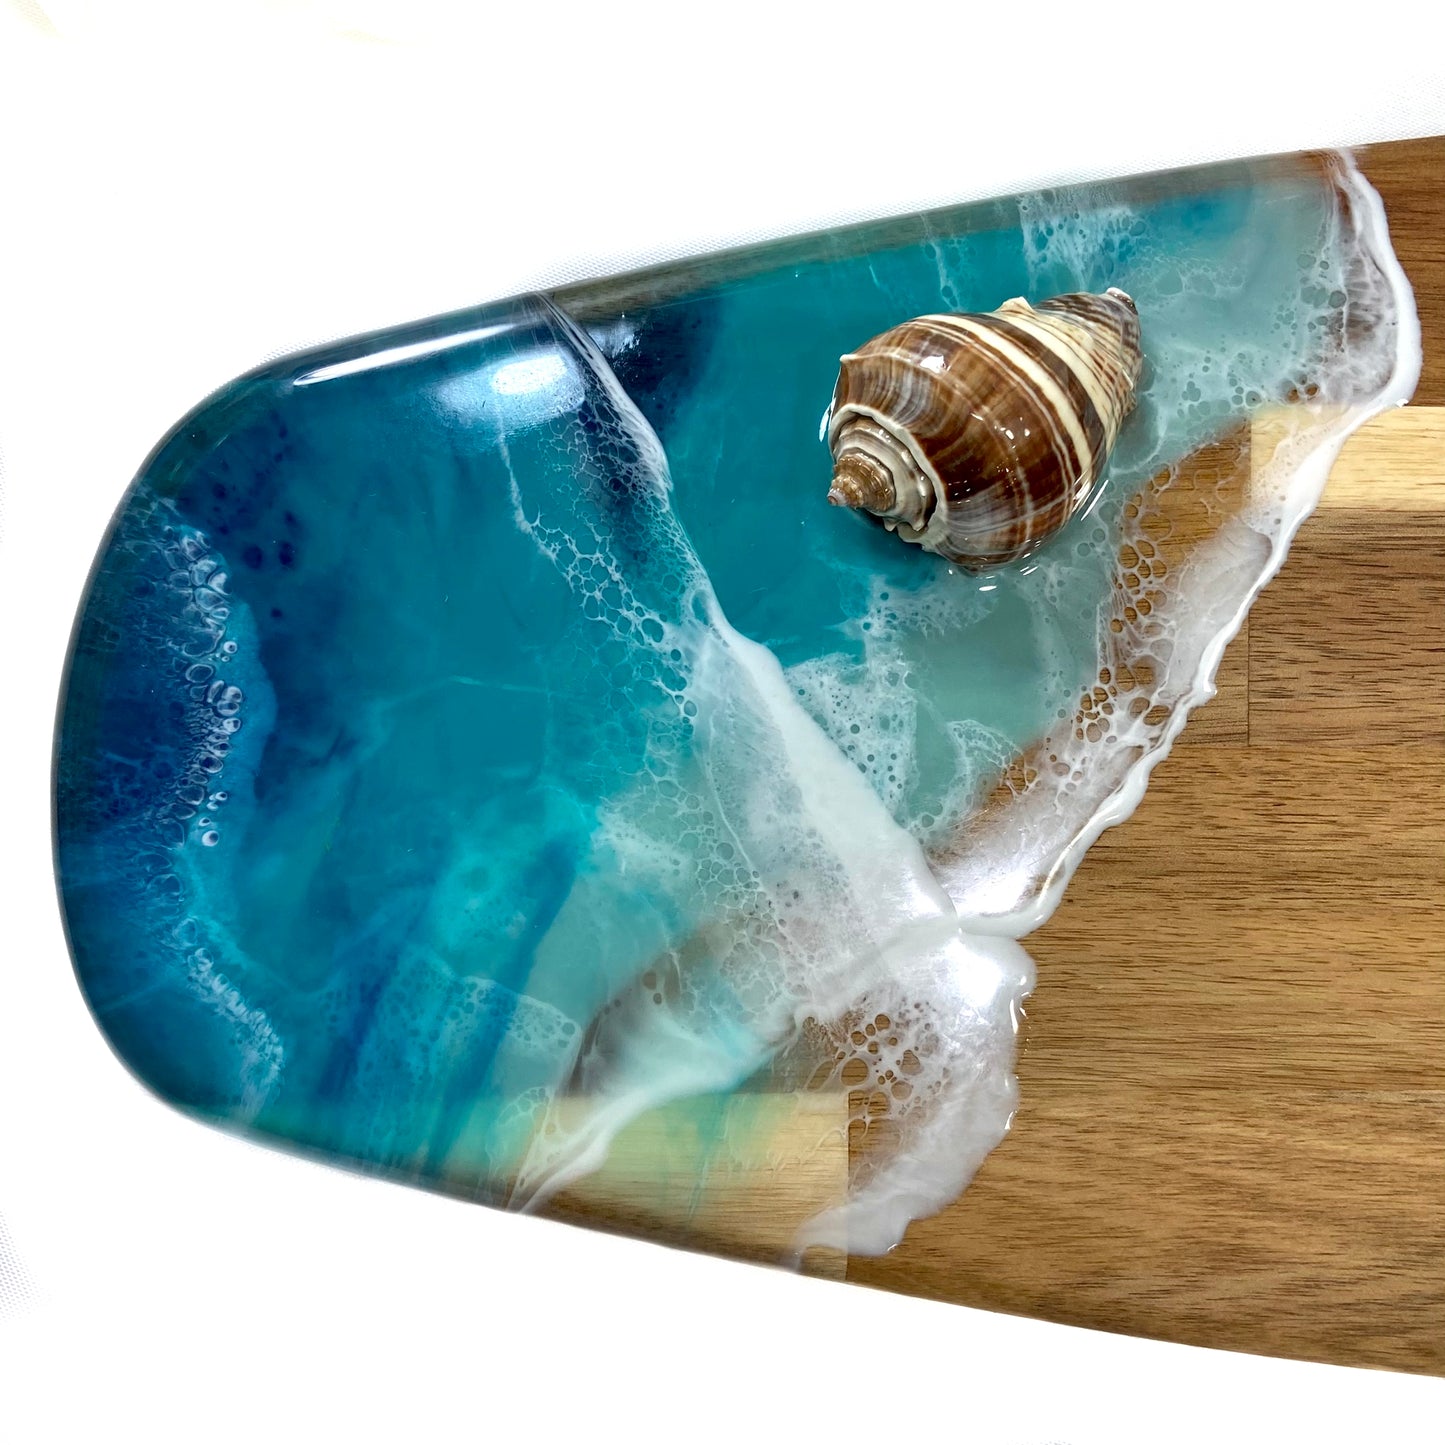 3D Resin-Poured Acacia Wood Serving Board with Seashell Accent